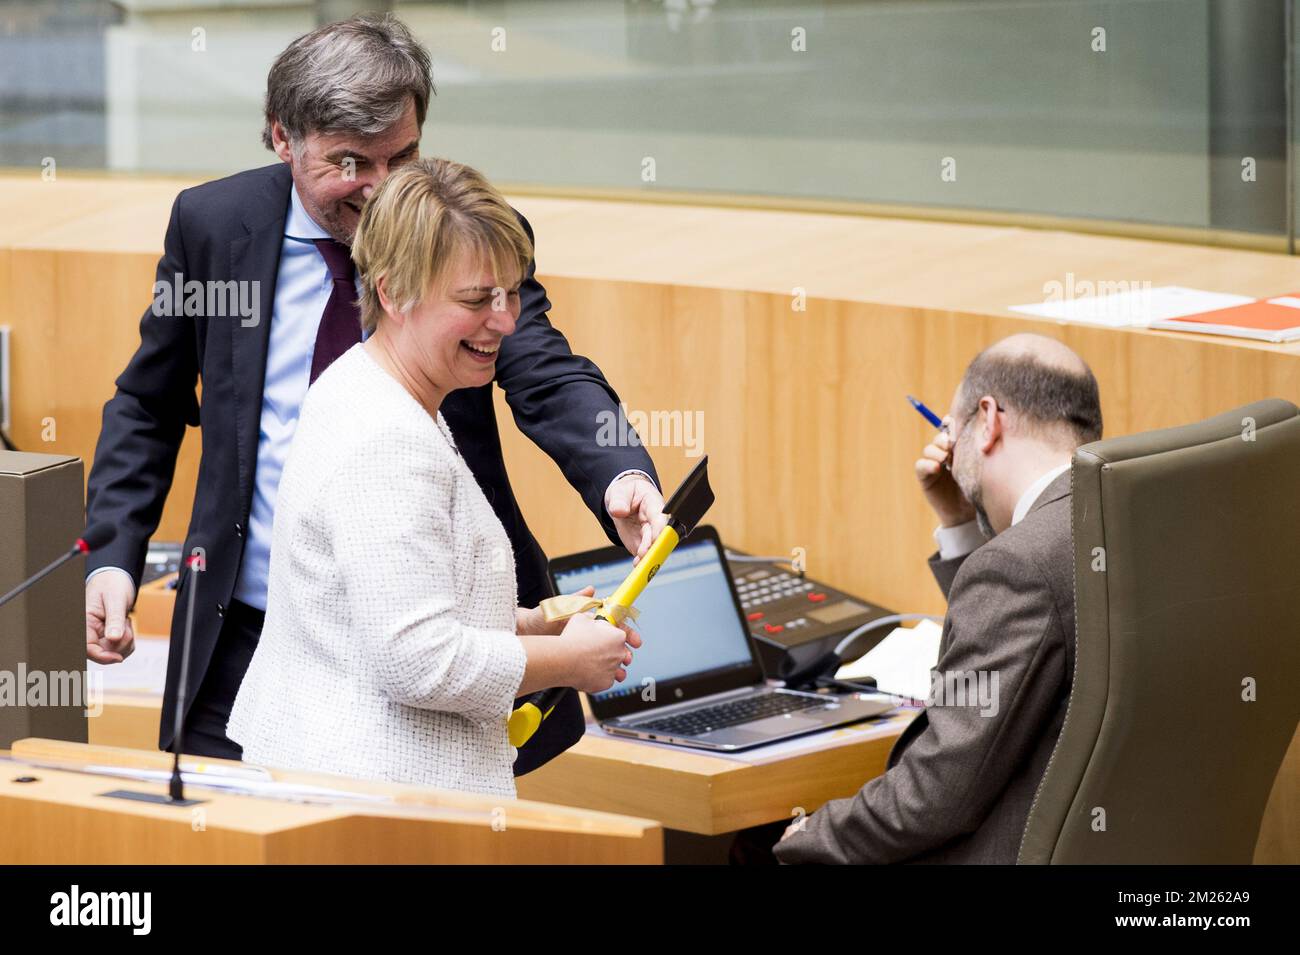 NV-A's Wilfried Vandaele and Flemish Minister of Environment, Spatial Planning and Agriculture Joke Schauvliege pictured after receiving an axe during a plenary session of the Flemish Parliament in Brussels, Wednesday 22 March 2017. BELGA PHOTO JASPER JACOBS Stock Photo